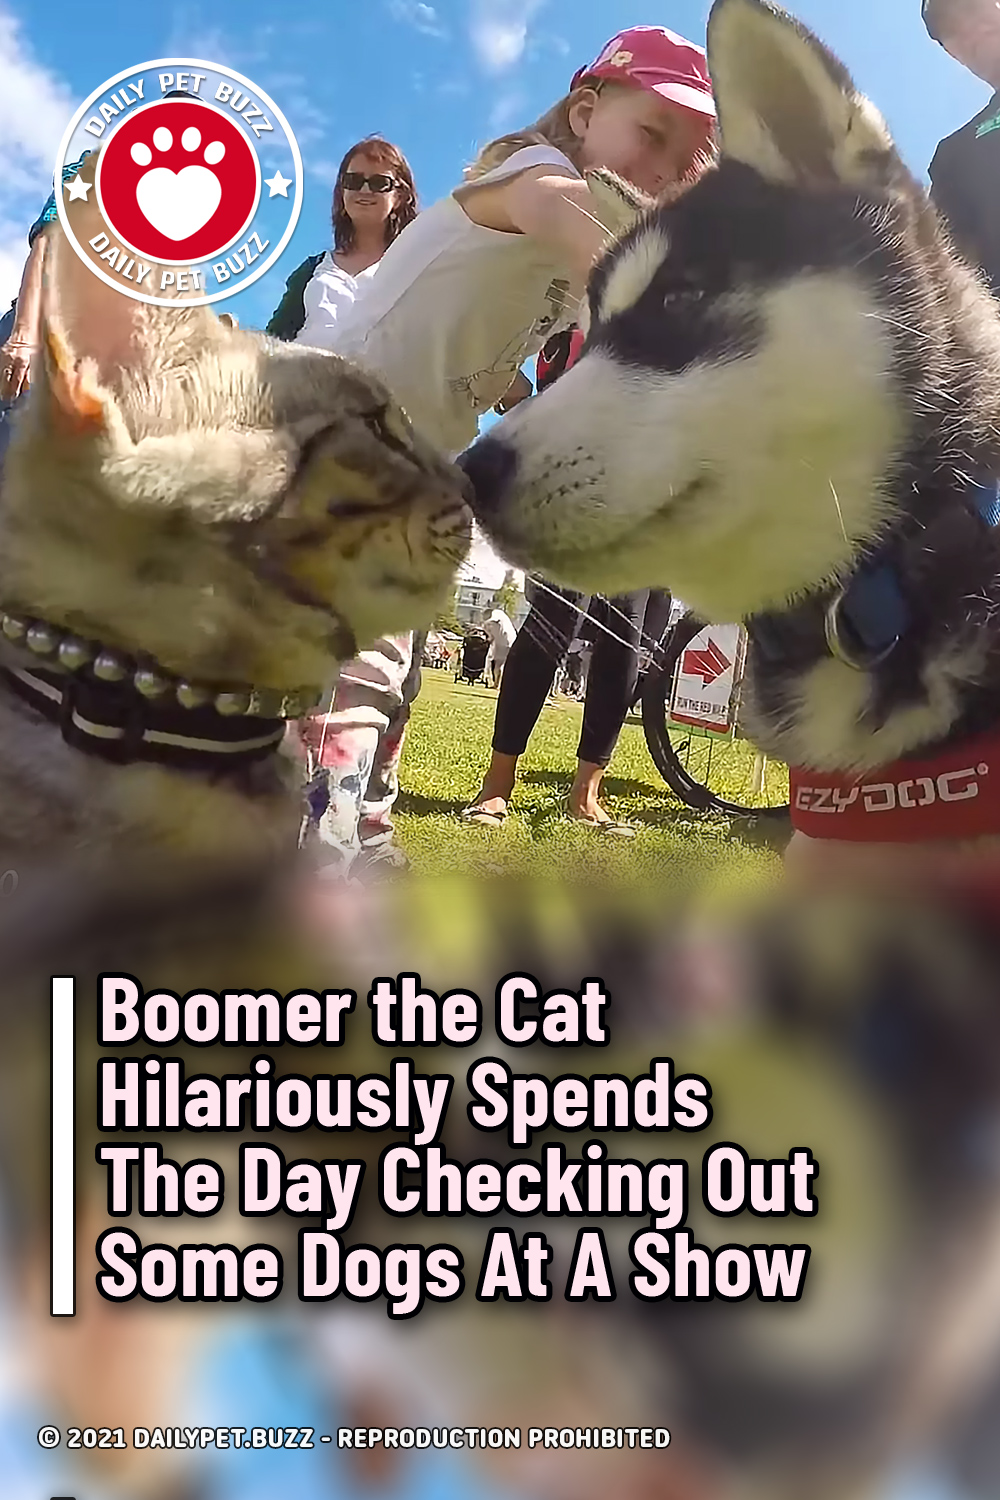 Boomer the Cat Hilariously Spends The Day Checking Out Some Dogs At A Show